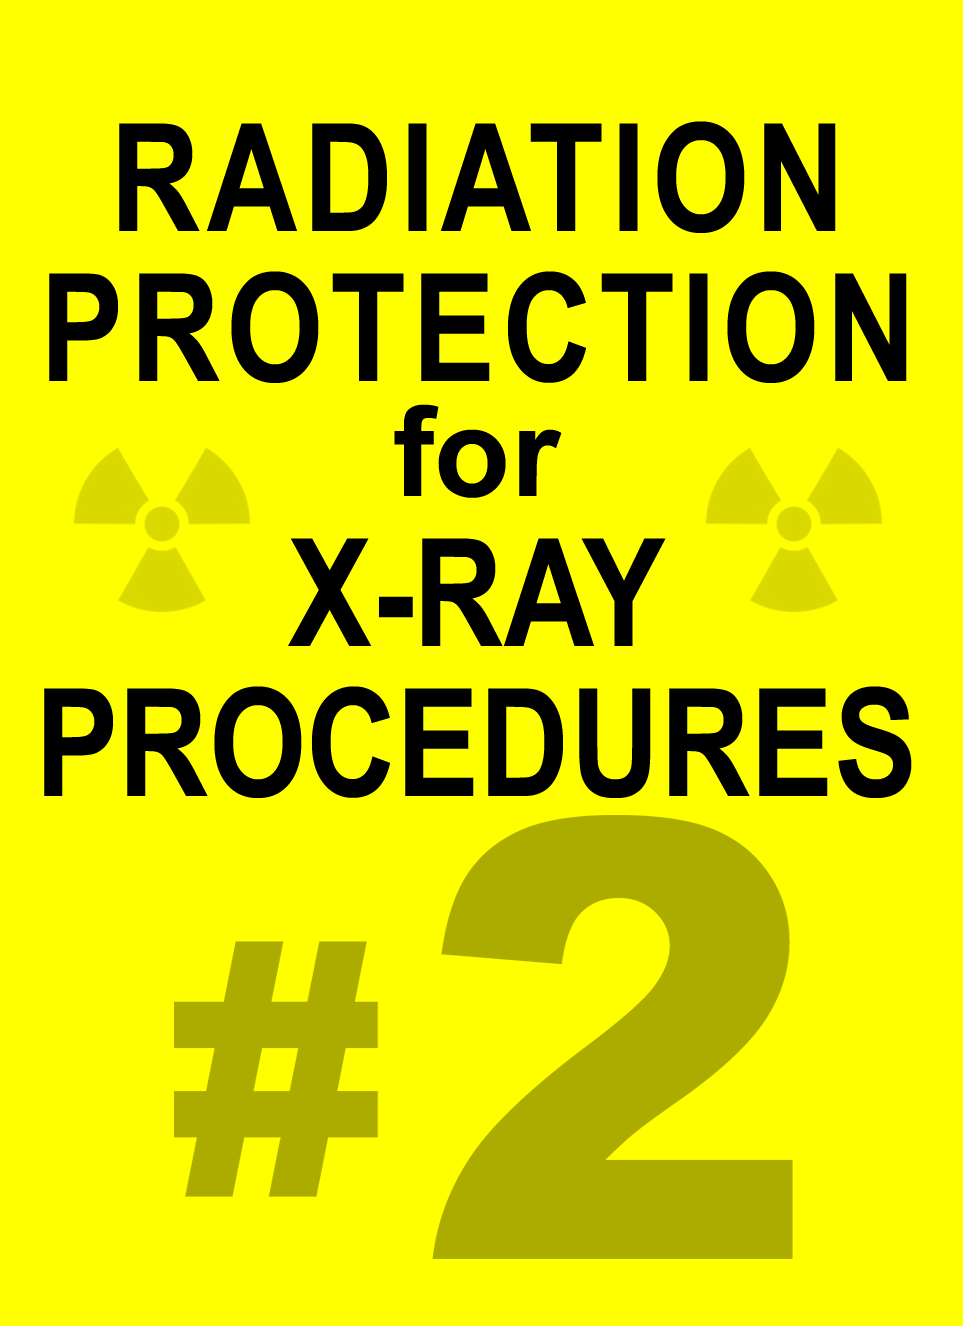 part-2-radiation-protection-for-x-ray-procedures-e-course-test-scrubs-continuing-education